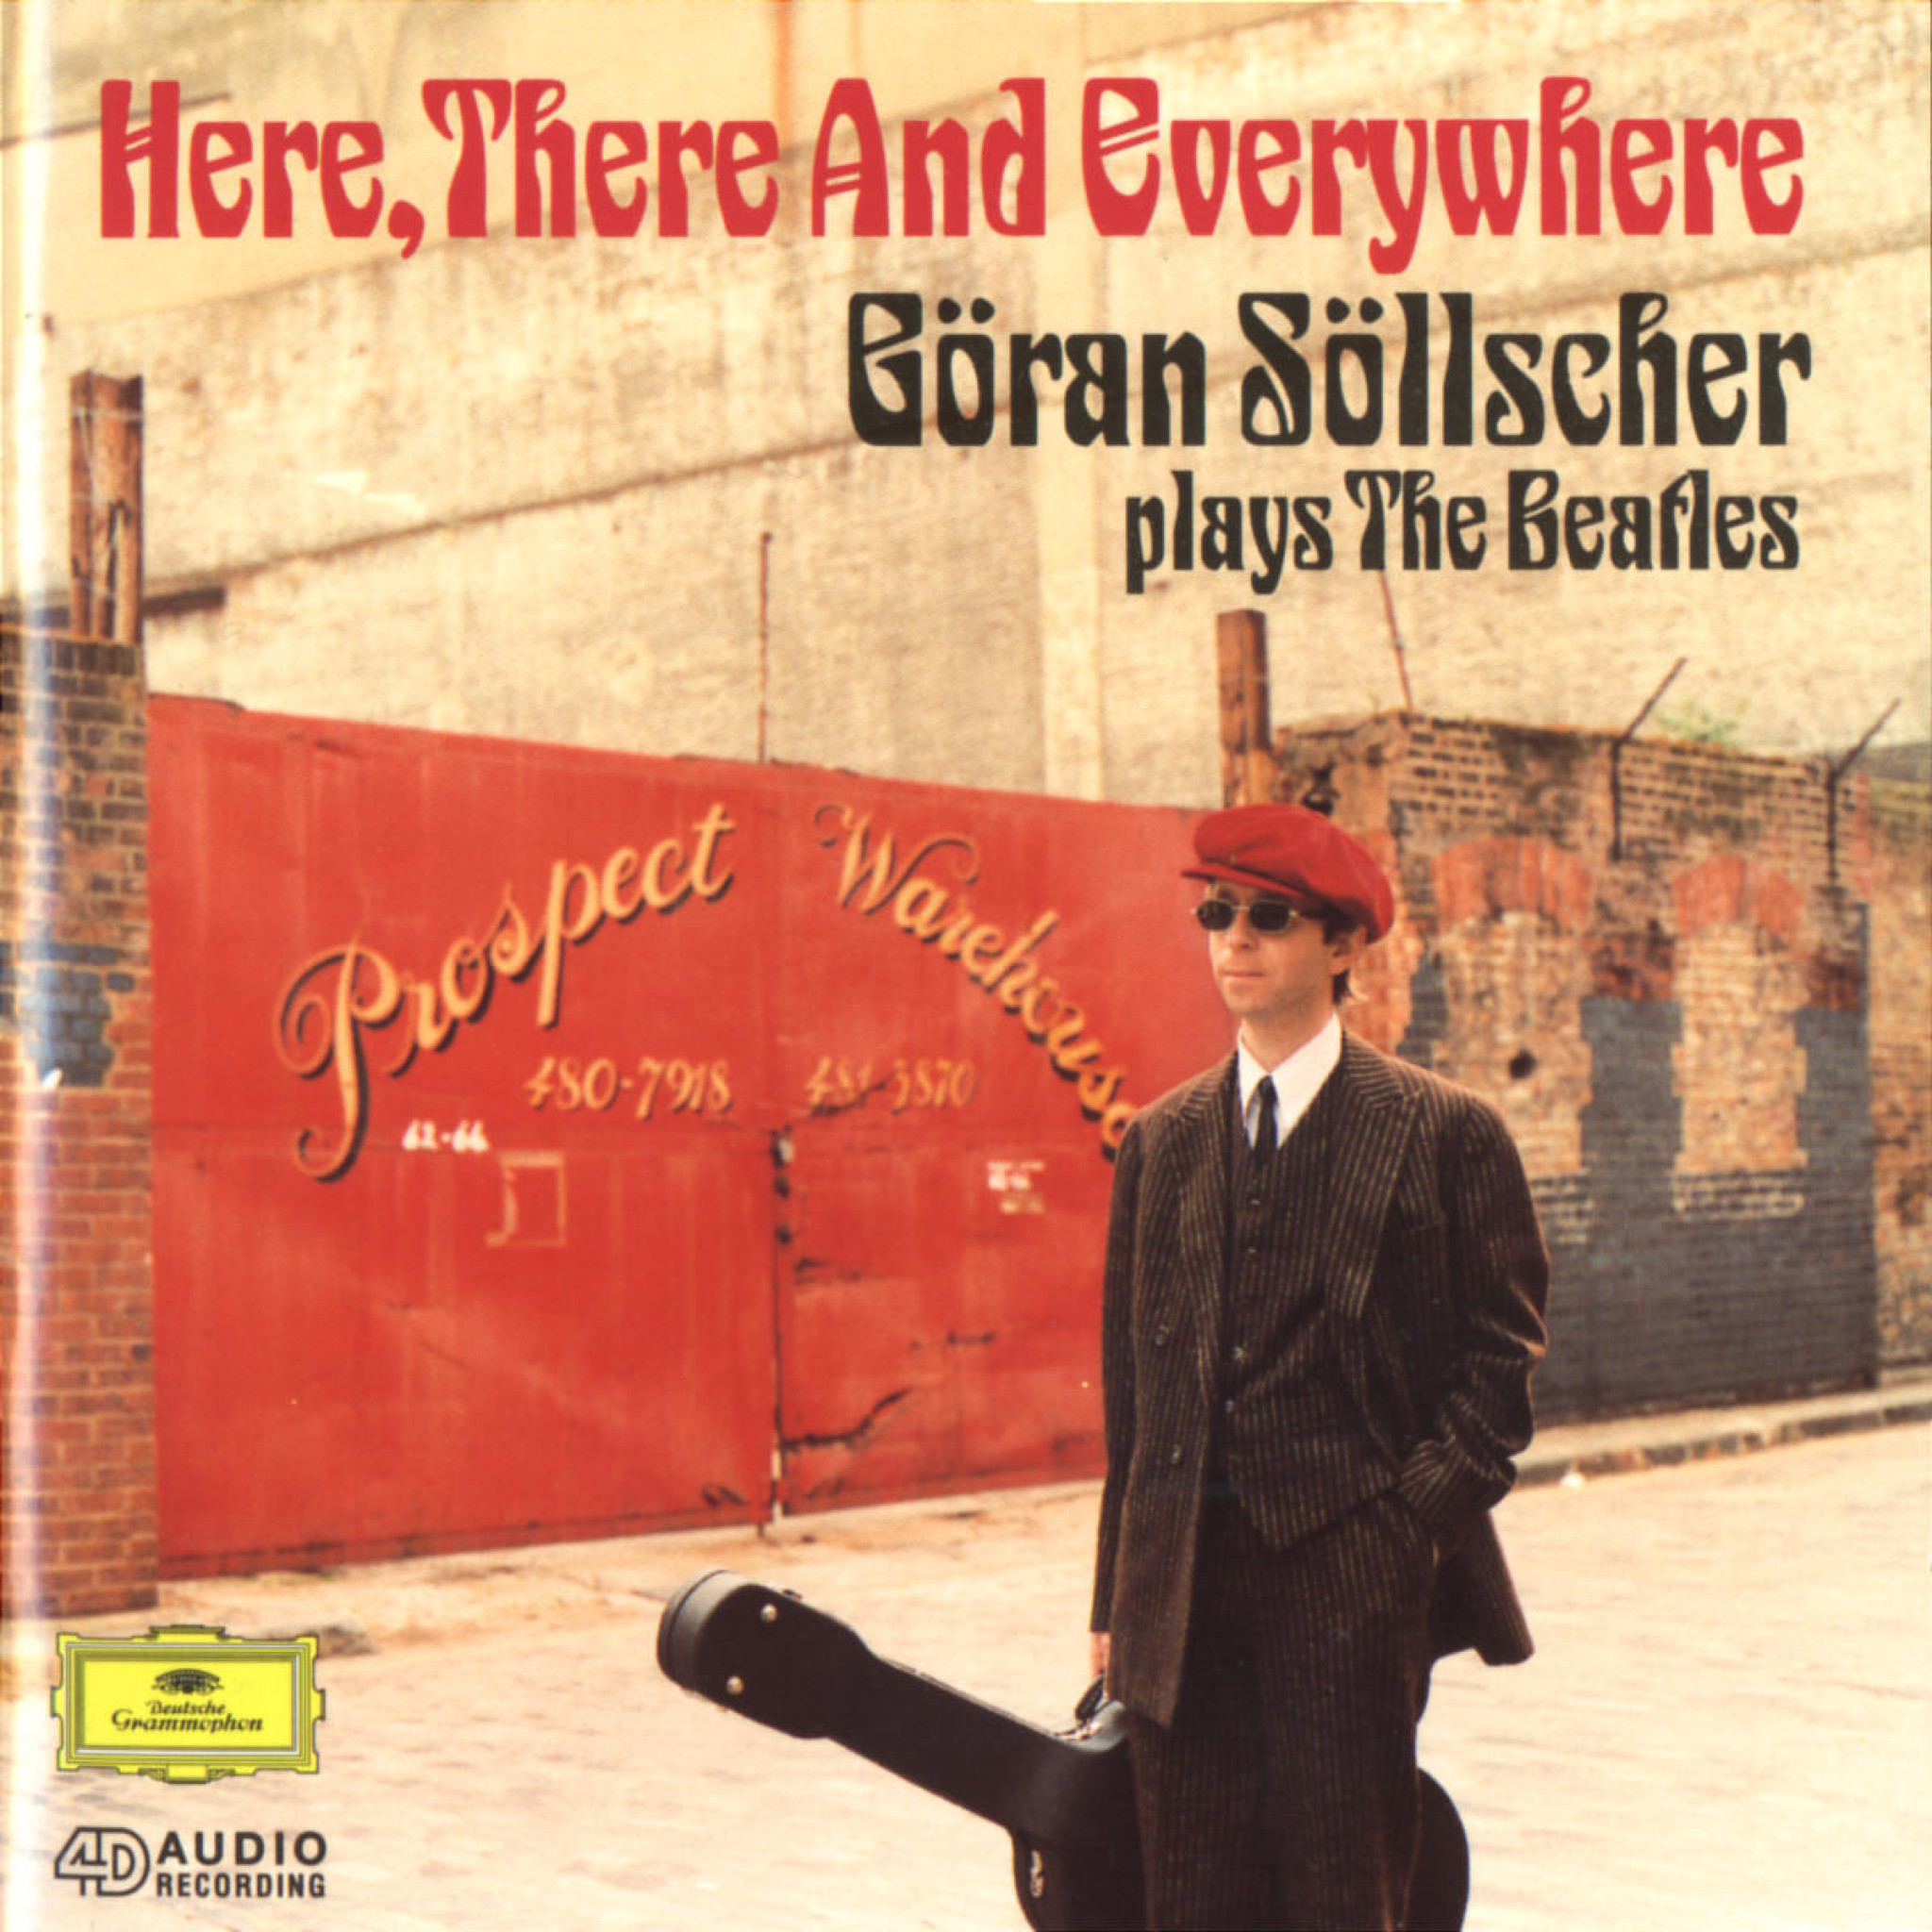 Here, There And Everywhere: Goran Sollscher plays The Beatles 0028944710421